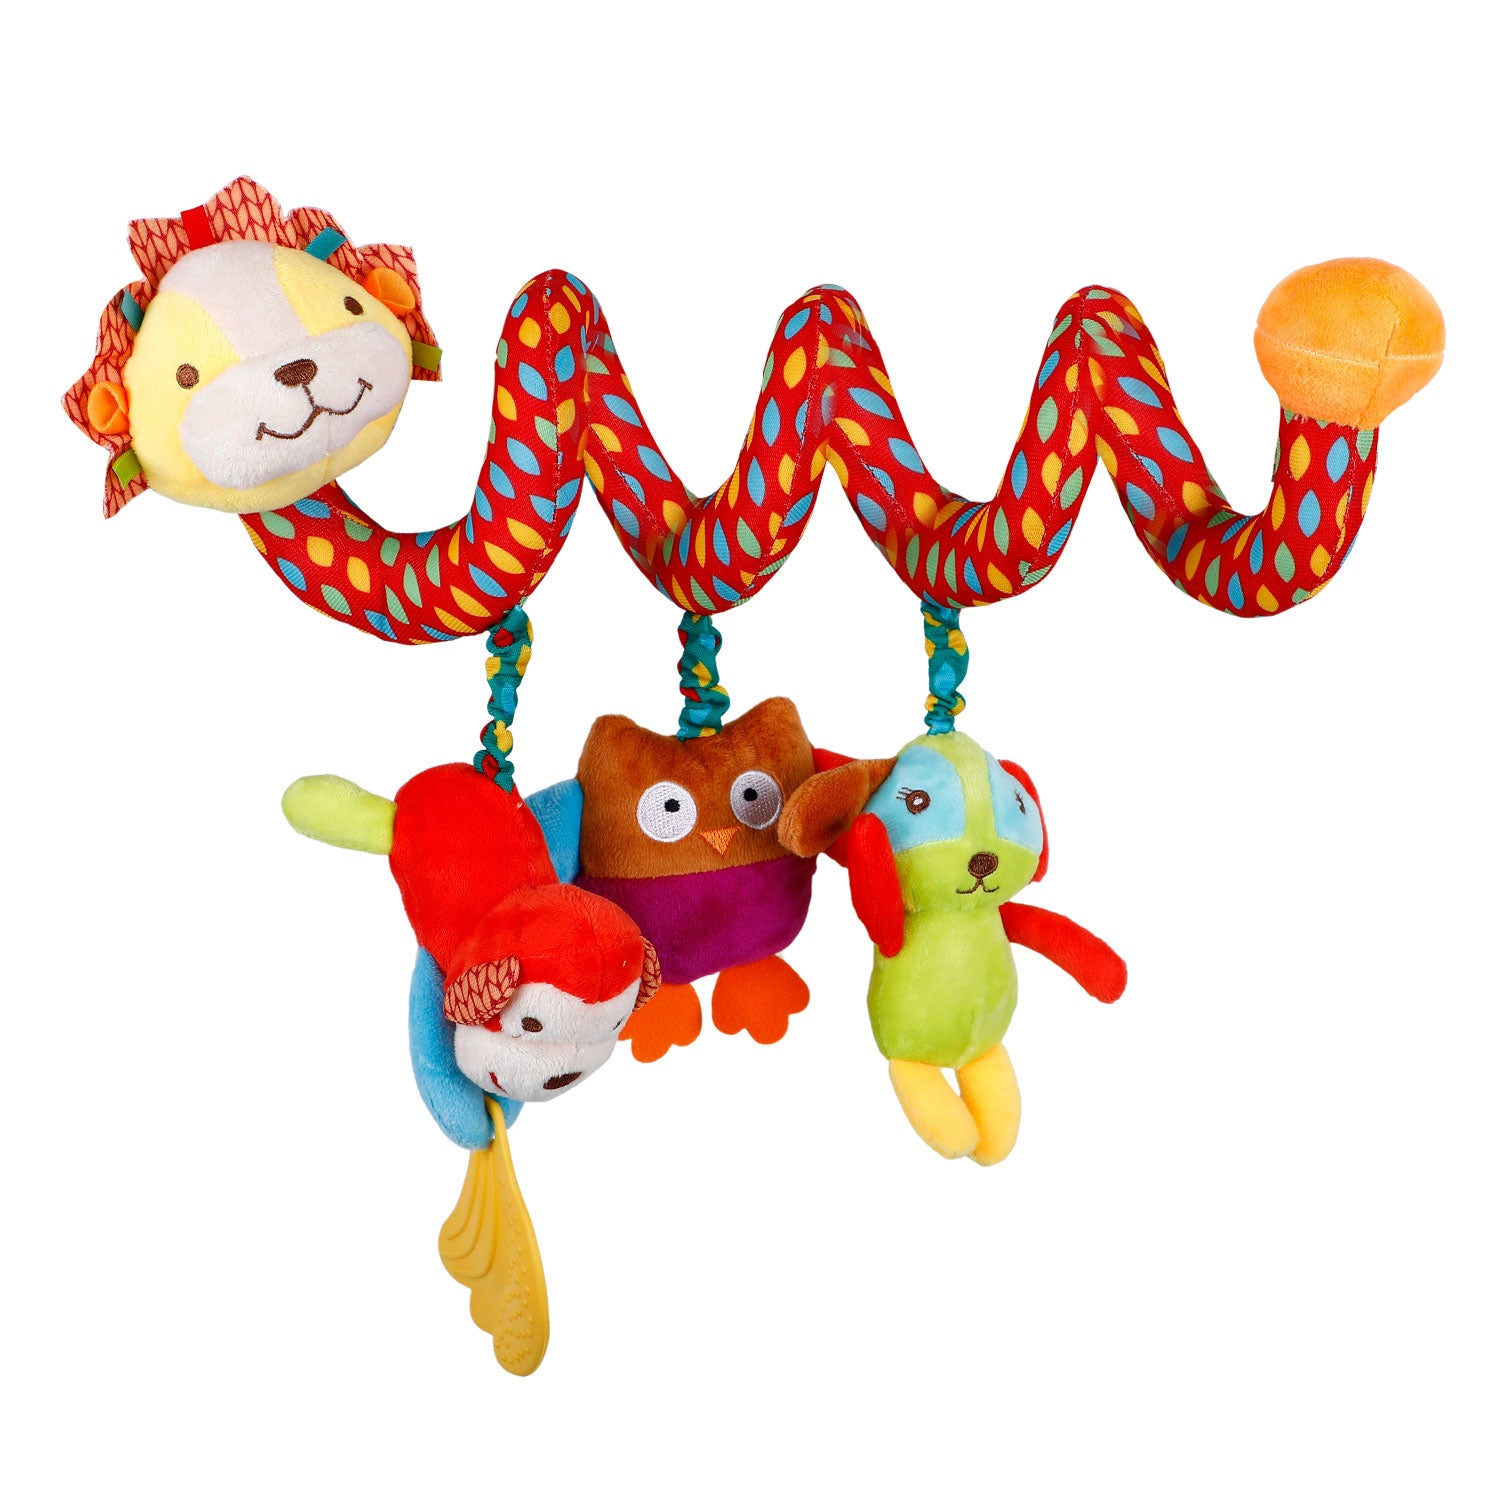 Baby Moo Jungle King Squeaker And Teething Musical Crib Spiral Toy - Red